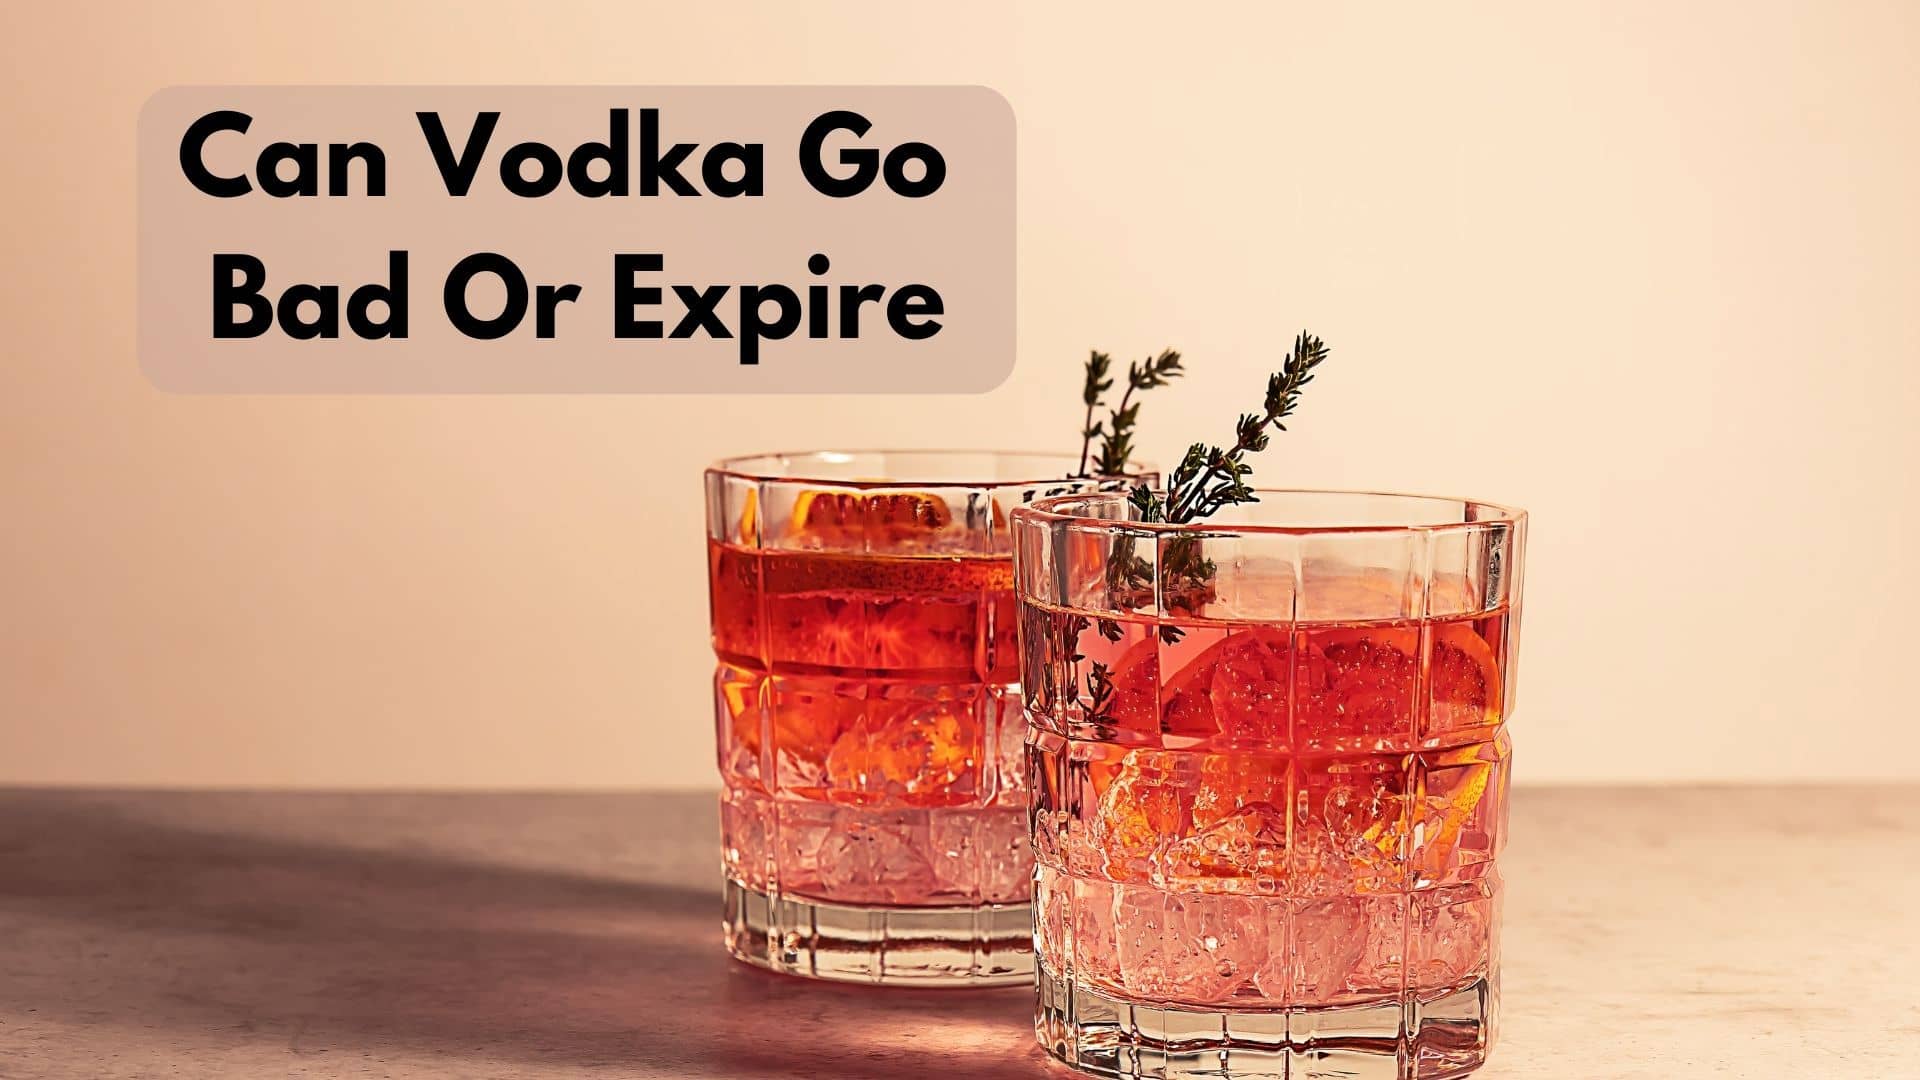 Can Vodka Go Bad Or Expire?